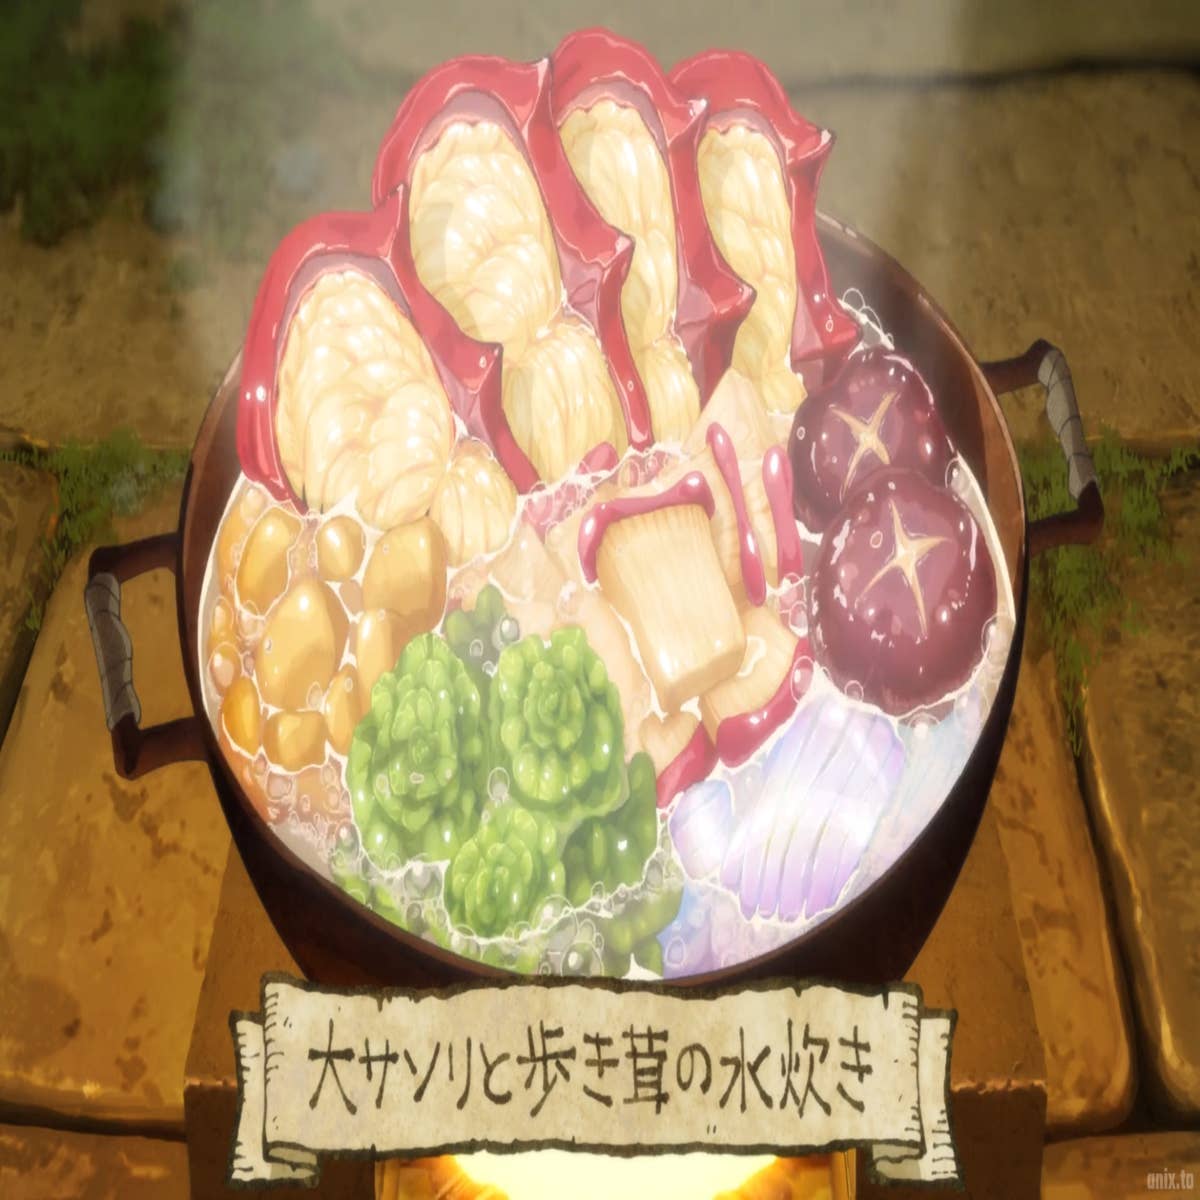 Netflix's newest anime about eating monsters has some great